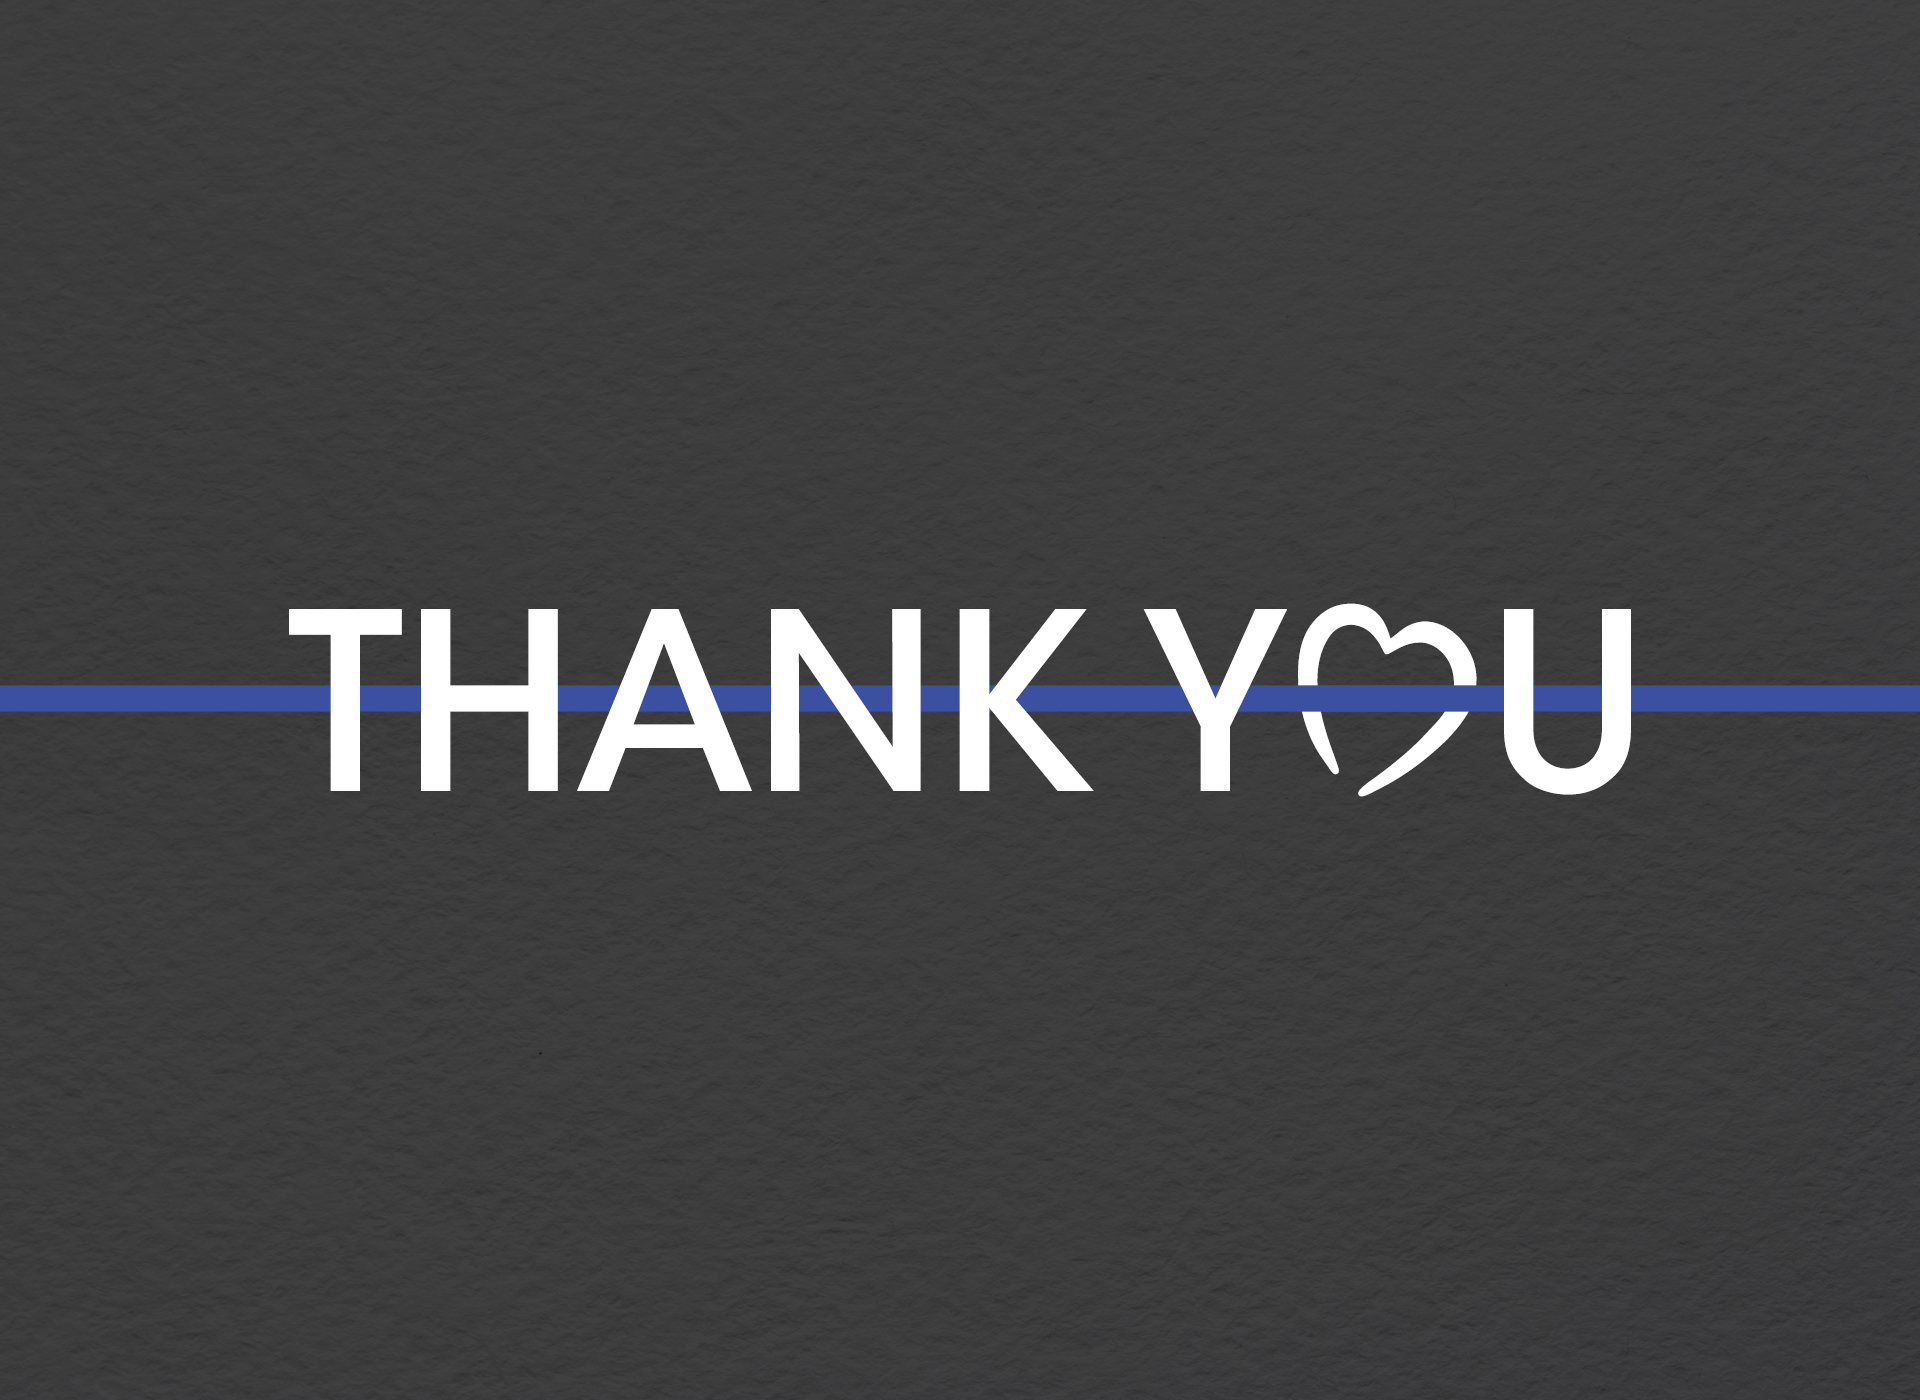 thank you in white on black background